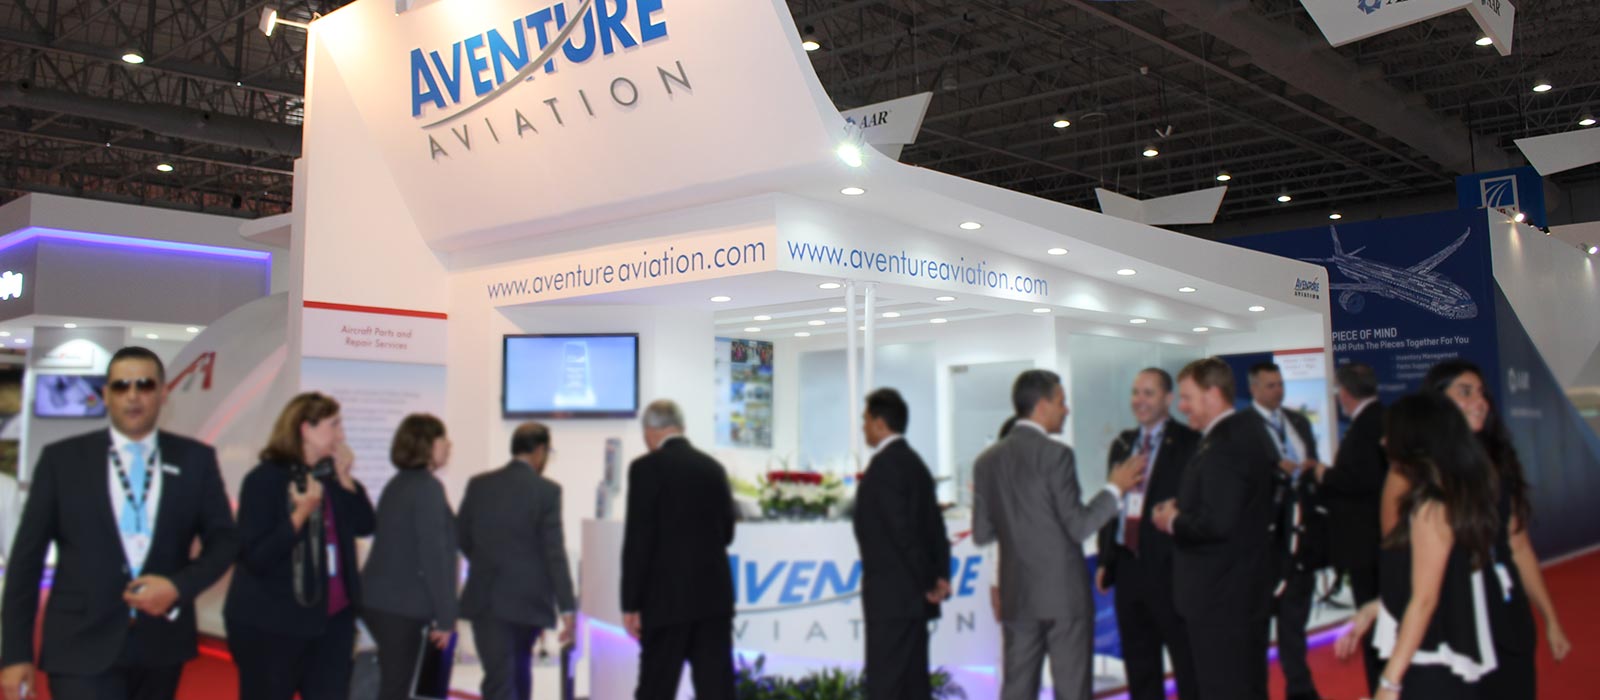 A large tradeshow booth saying "Aventure Aviation" at the top, with over a dozen people outside